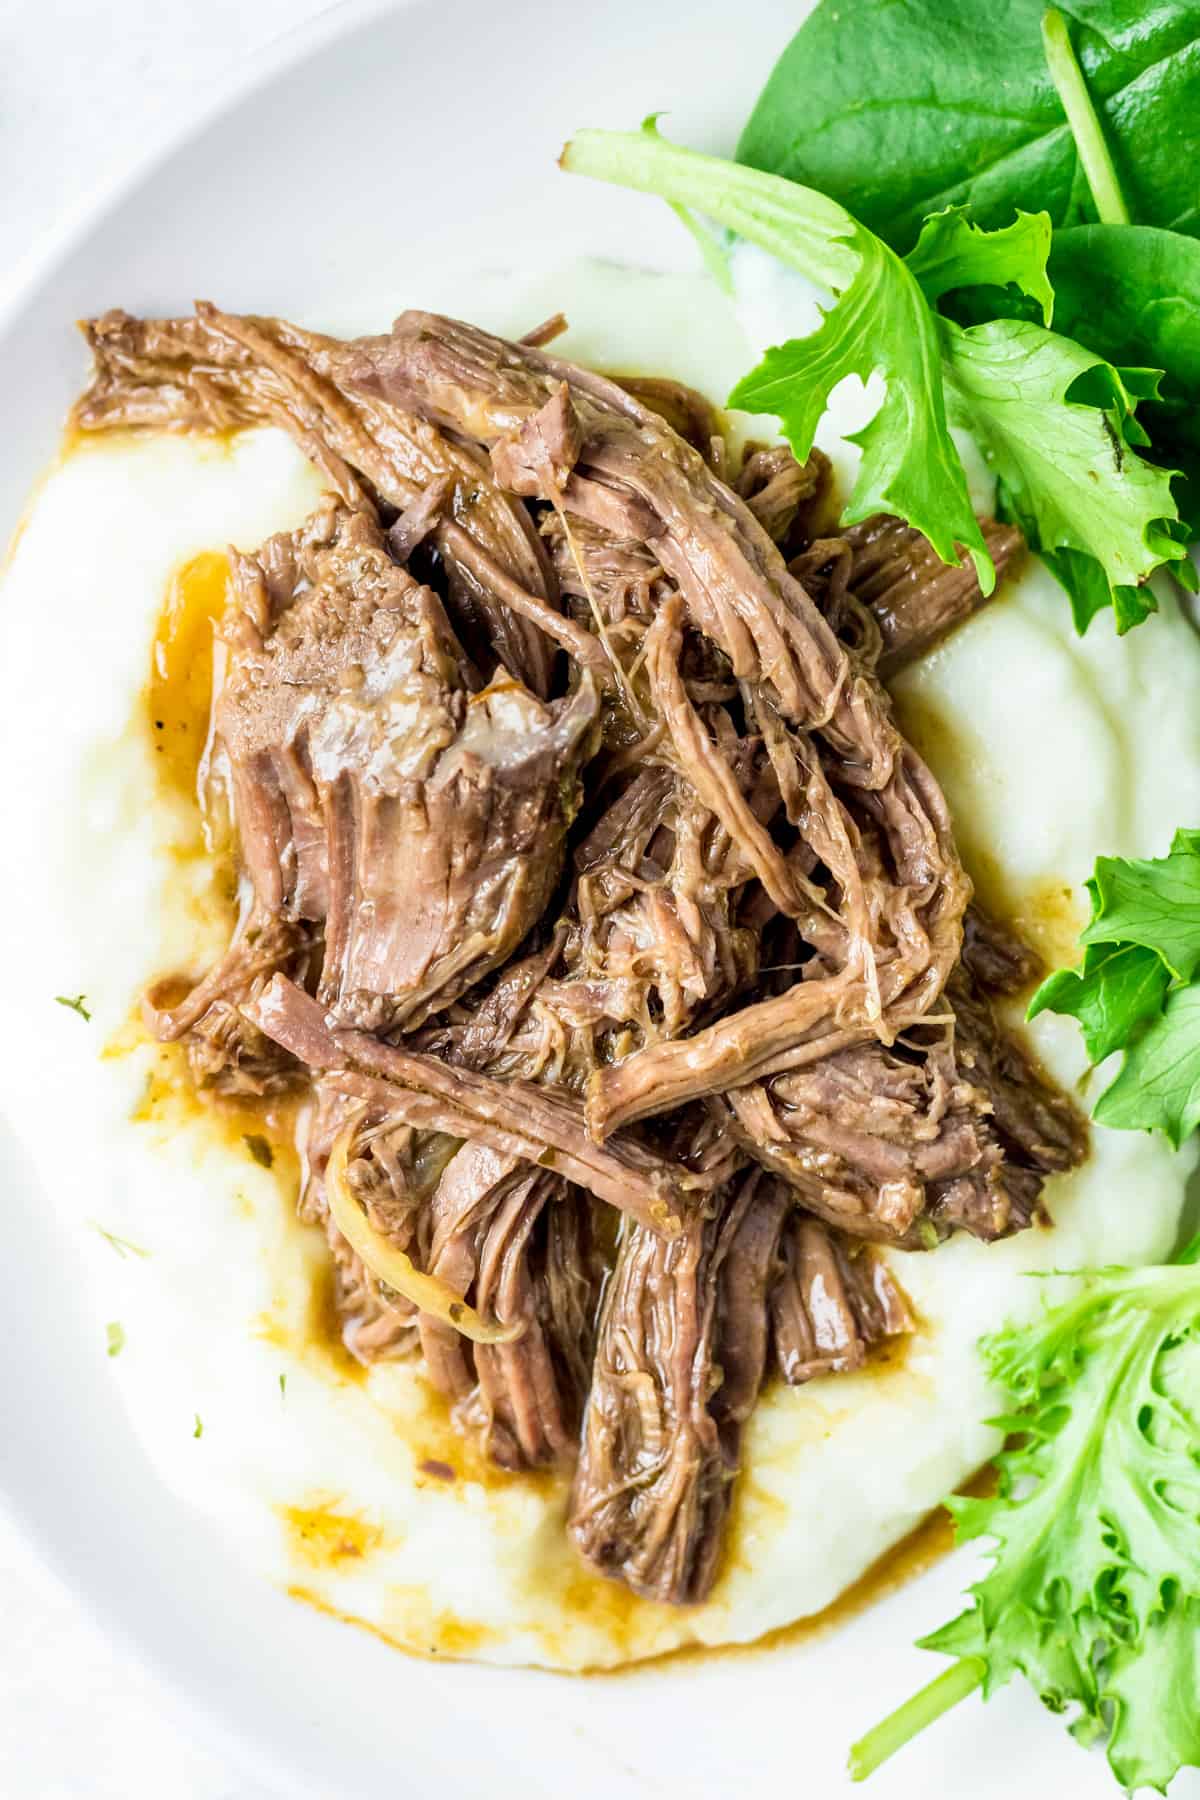 Overhead photo of shredded beef on mashed potatoes on white plate/